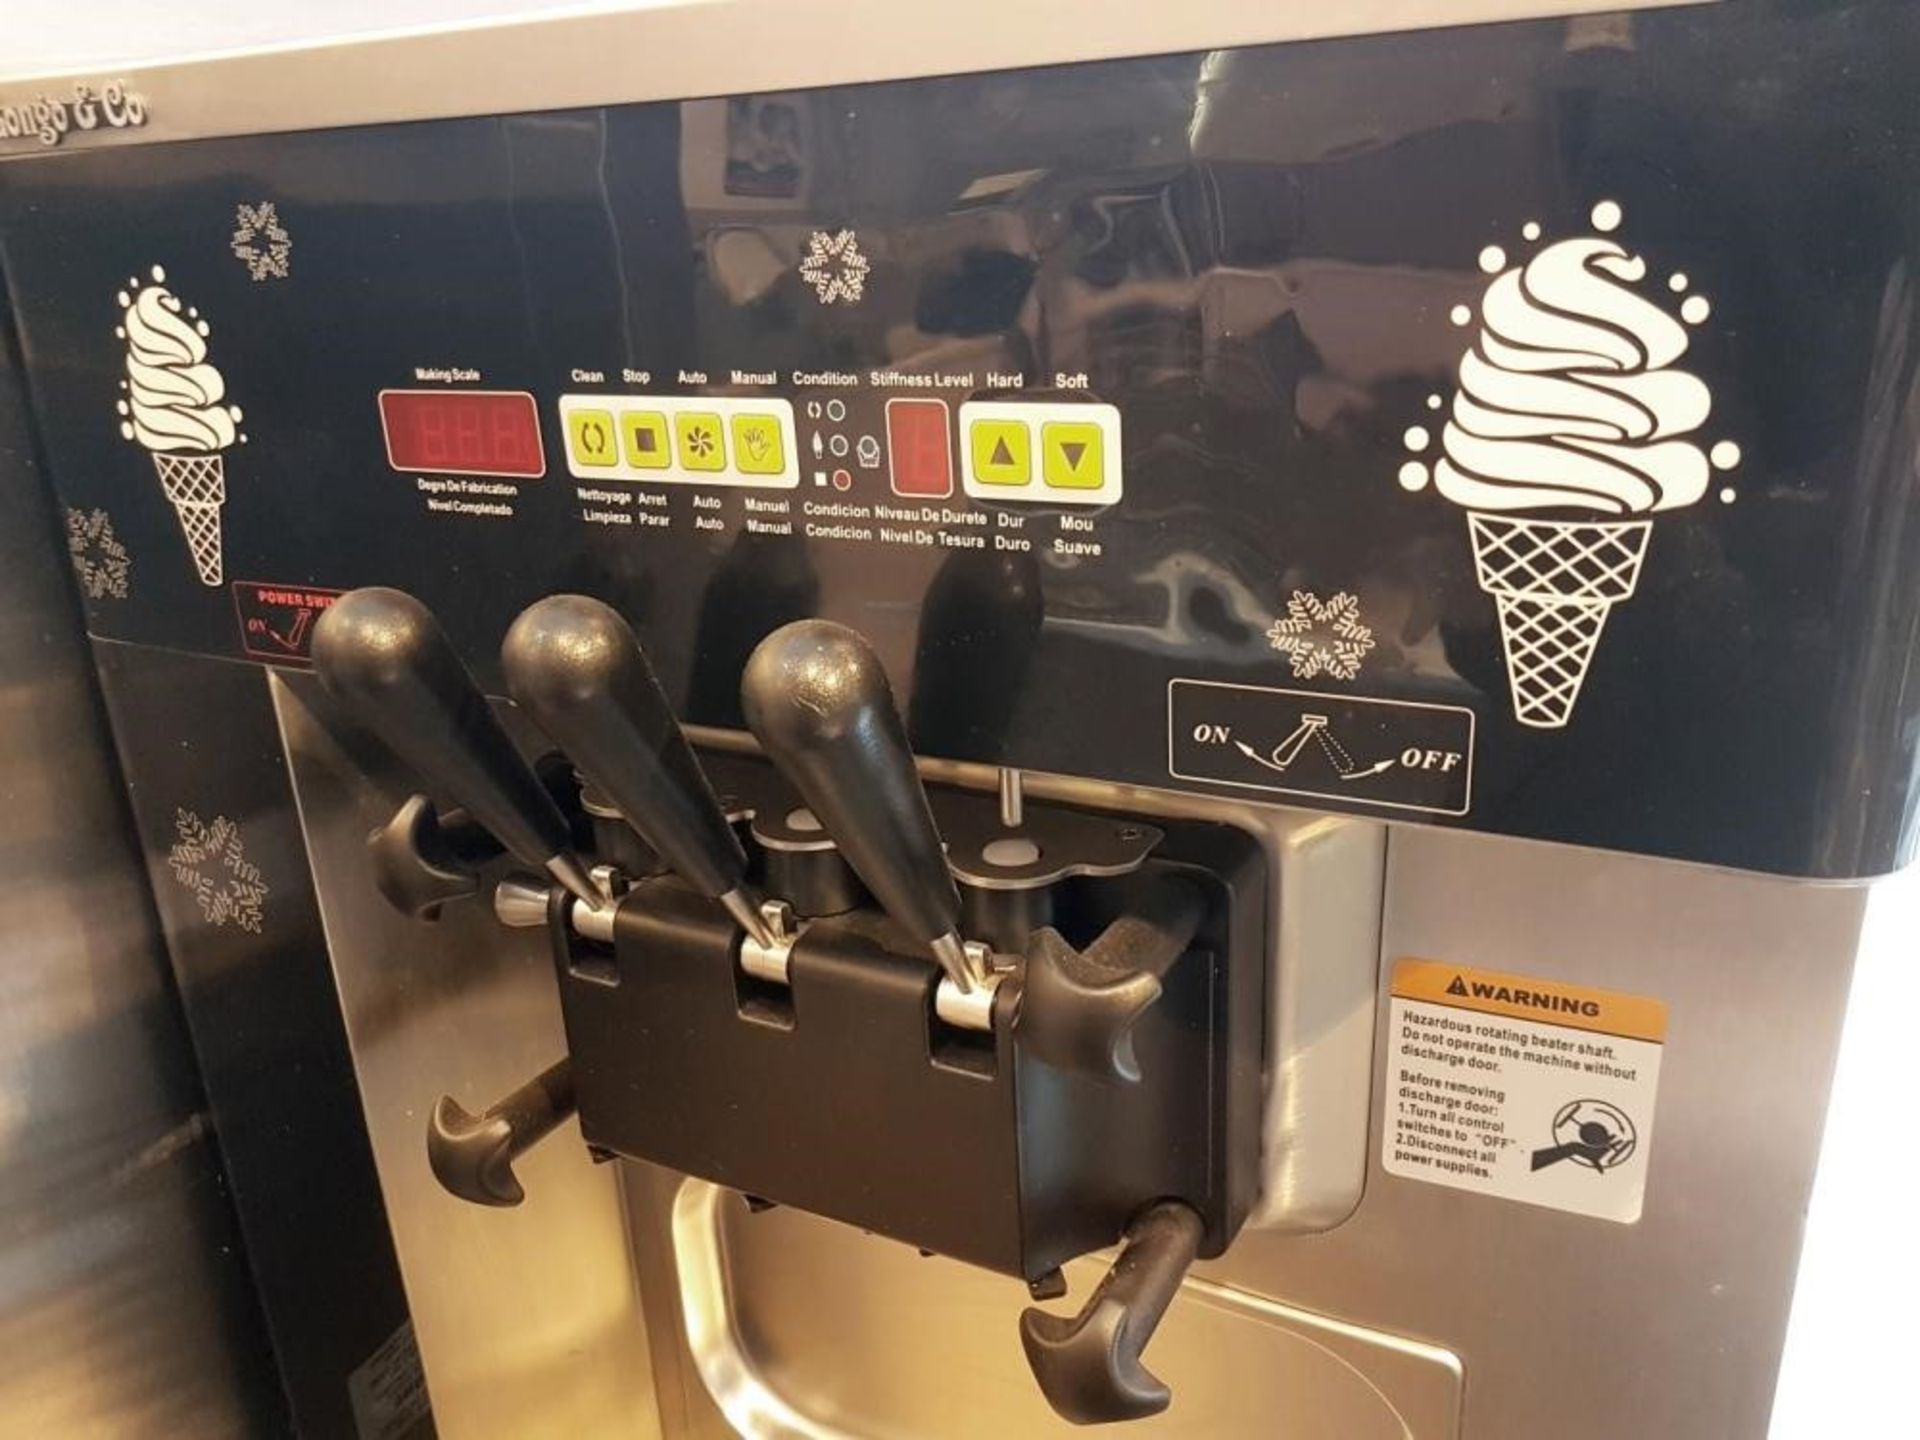 1 x Artic 132BA Commercial Ice-cream Machine And Stand - Around 12 Months Old In Great Condition - F - Image 2 of 11